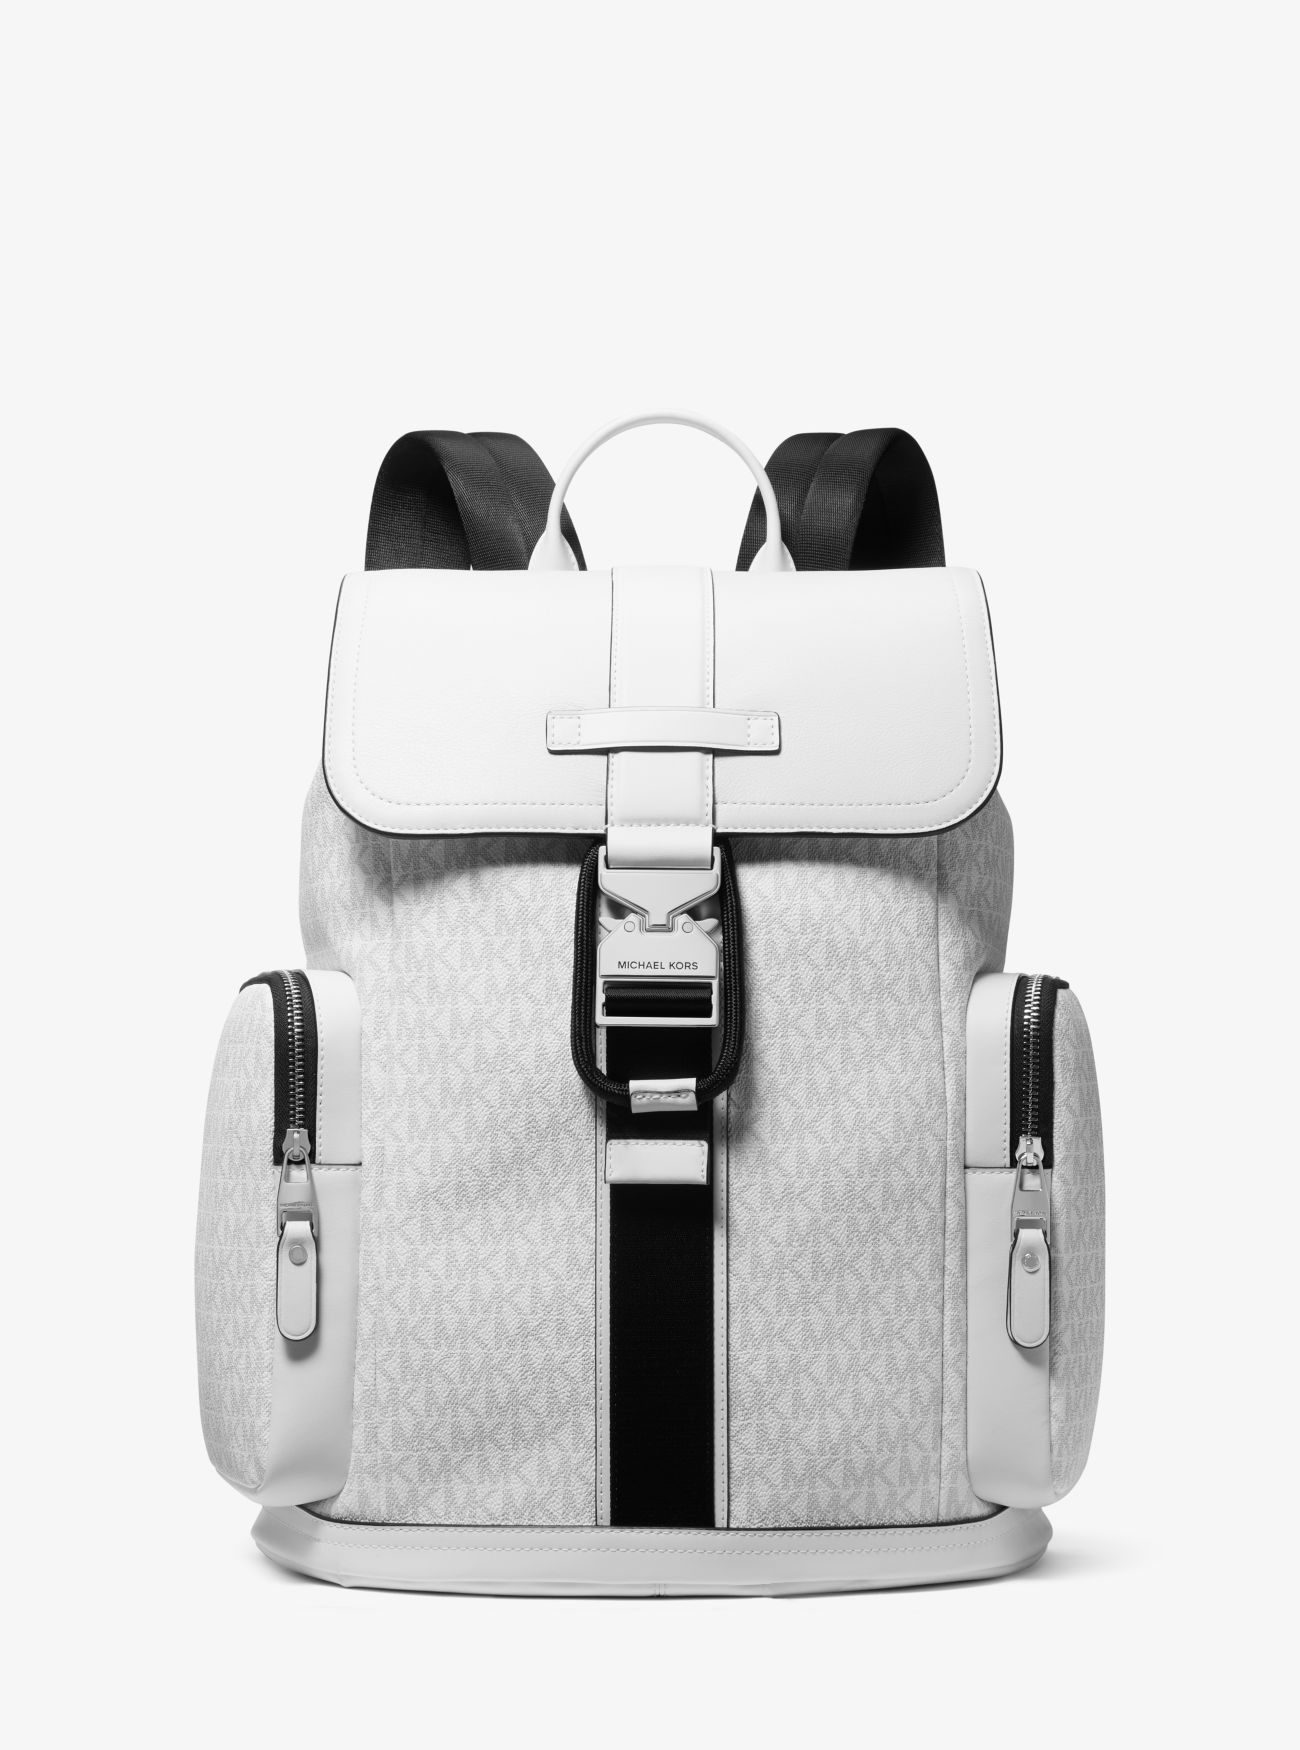 MK Hudson Signature Logo and Leather Cargo Backpack - Bright Wht - Michael Kors